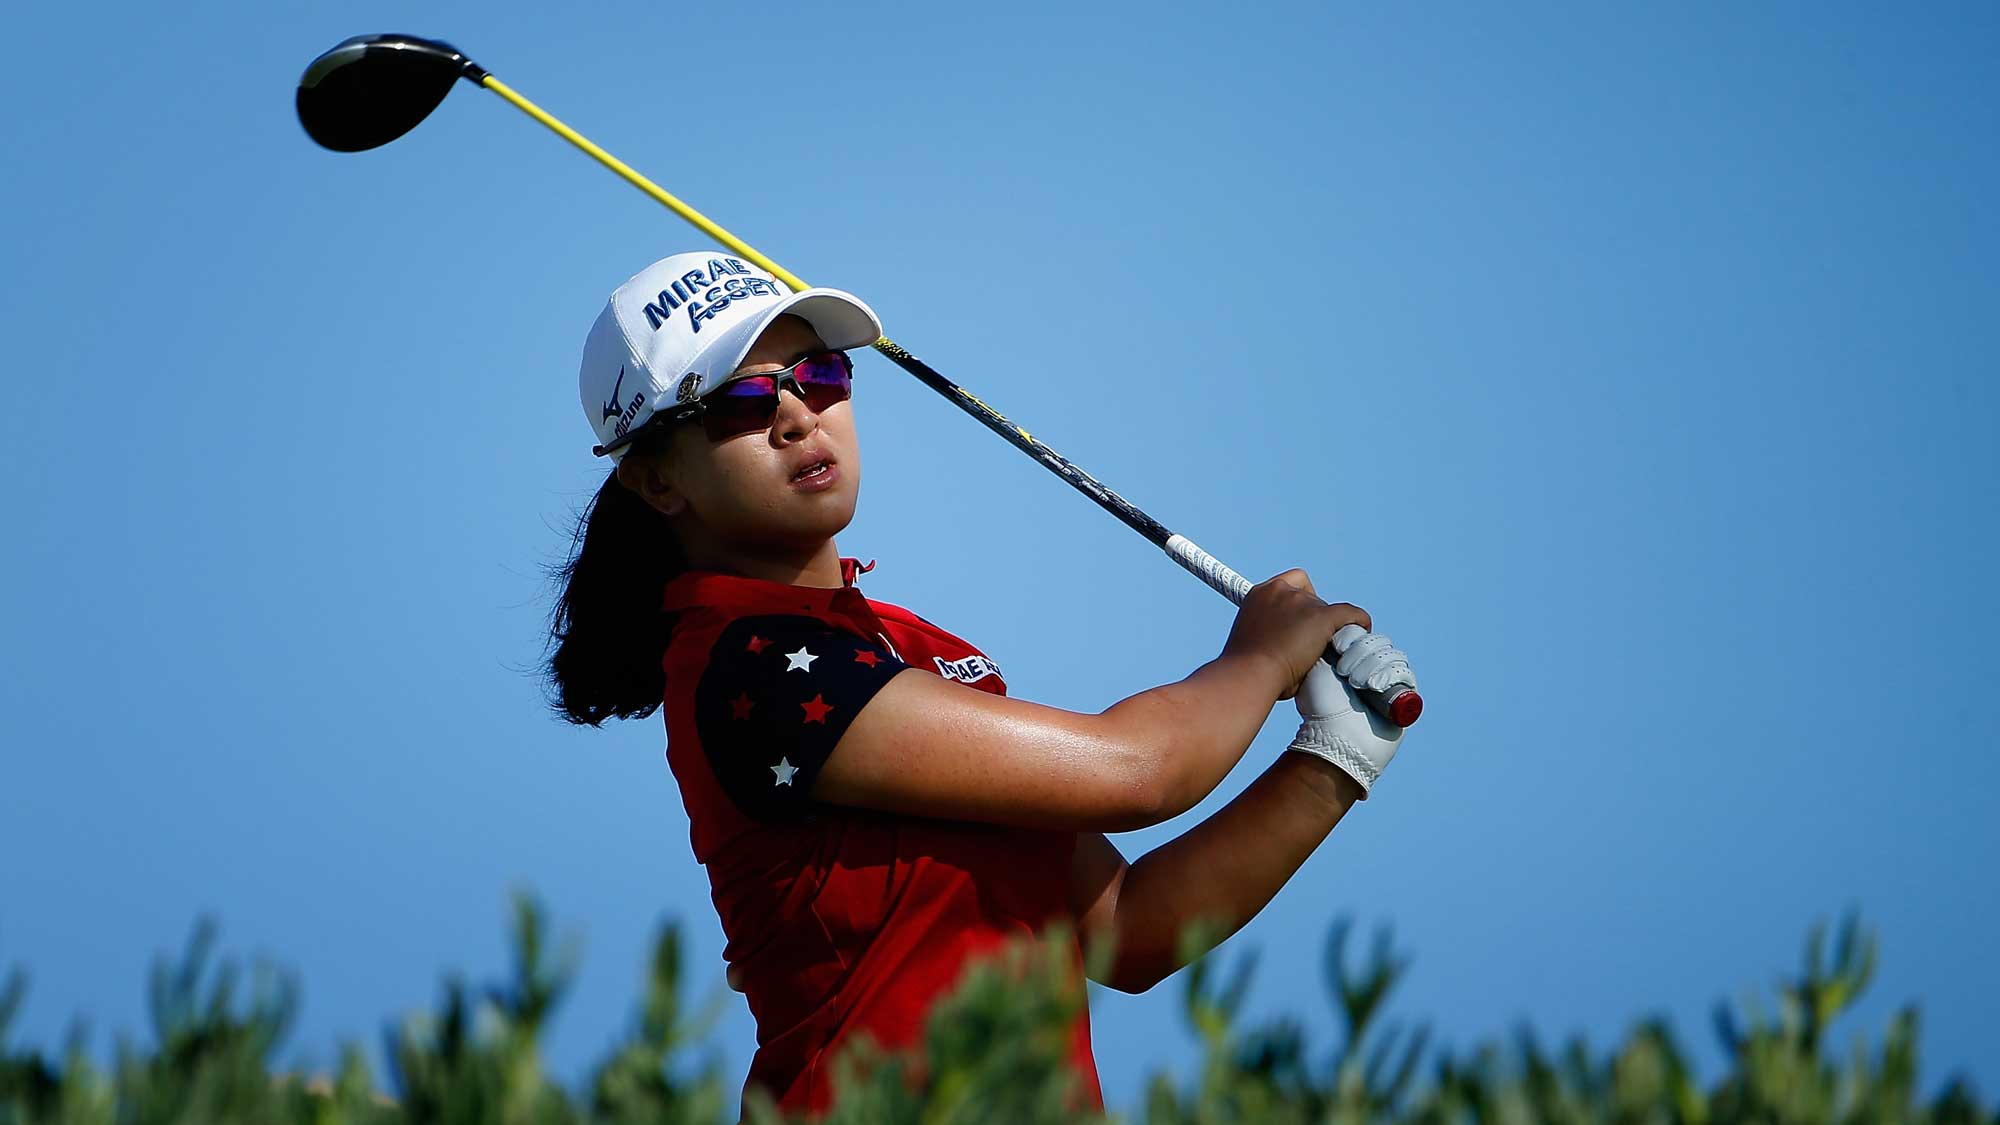 Sei Young Kim of South Korea plays a tee shot on the 13th hole during the second round of the LPGA LOTTE Championship